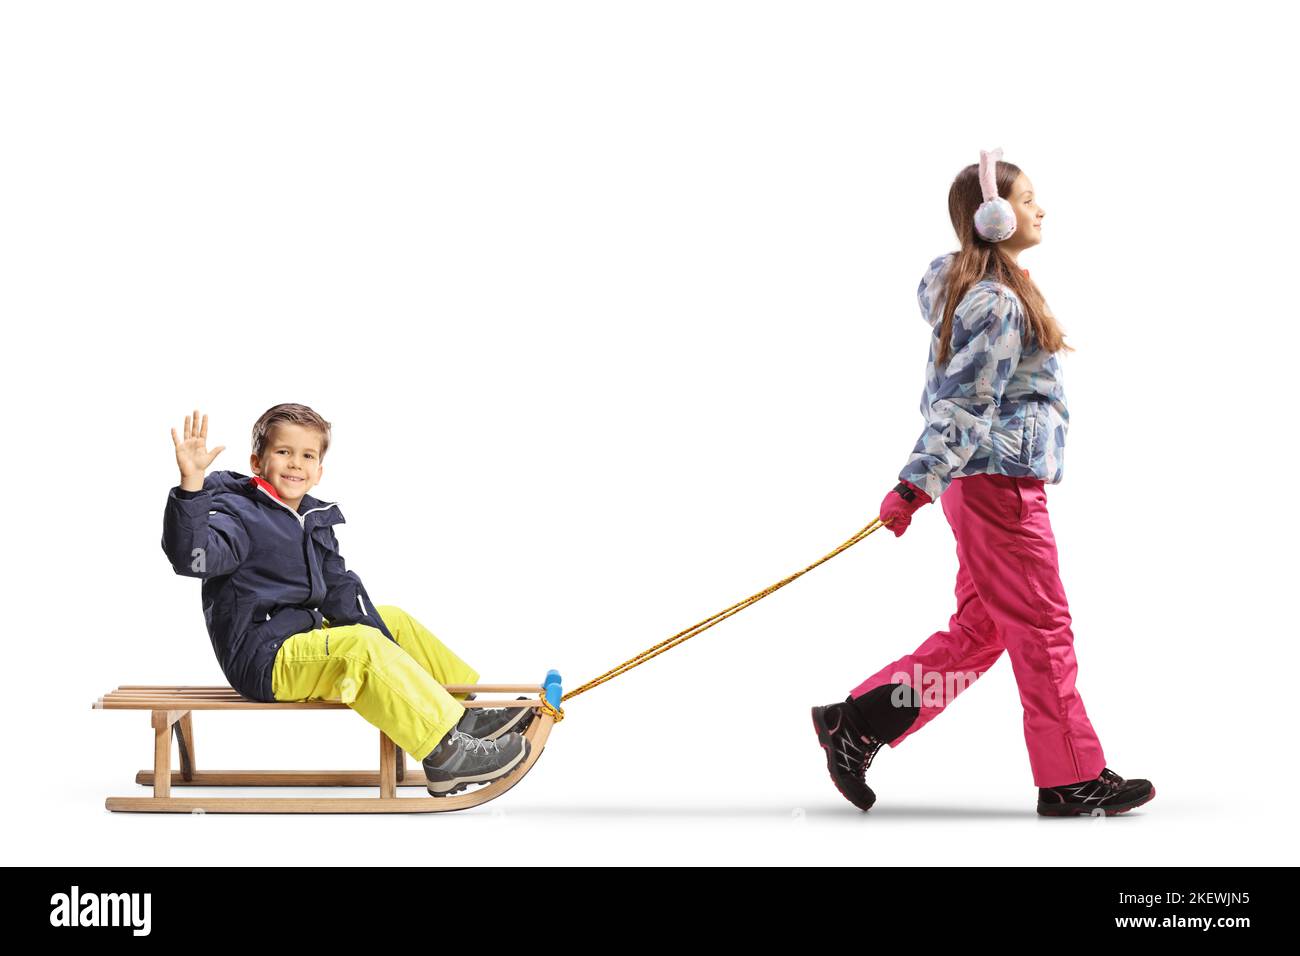 Full length profile shot of a girl pulling a boy on a wooden sled isolated on white background Stock Photo